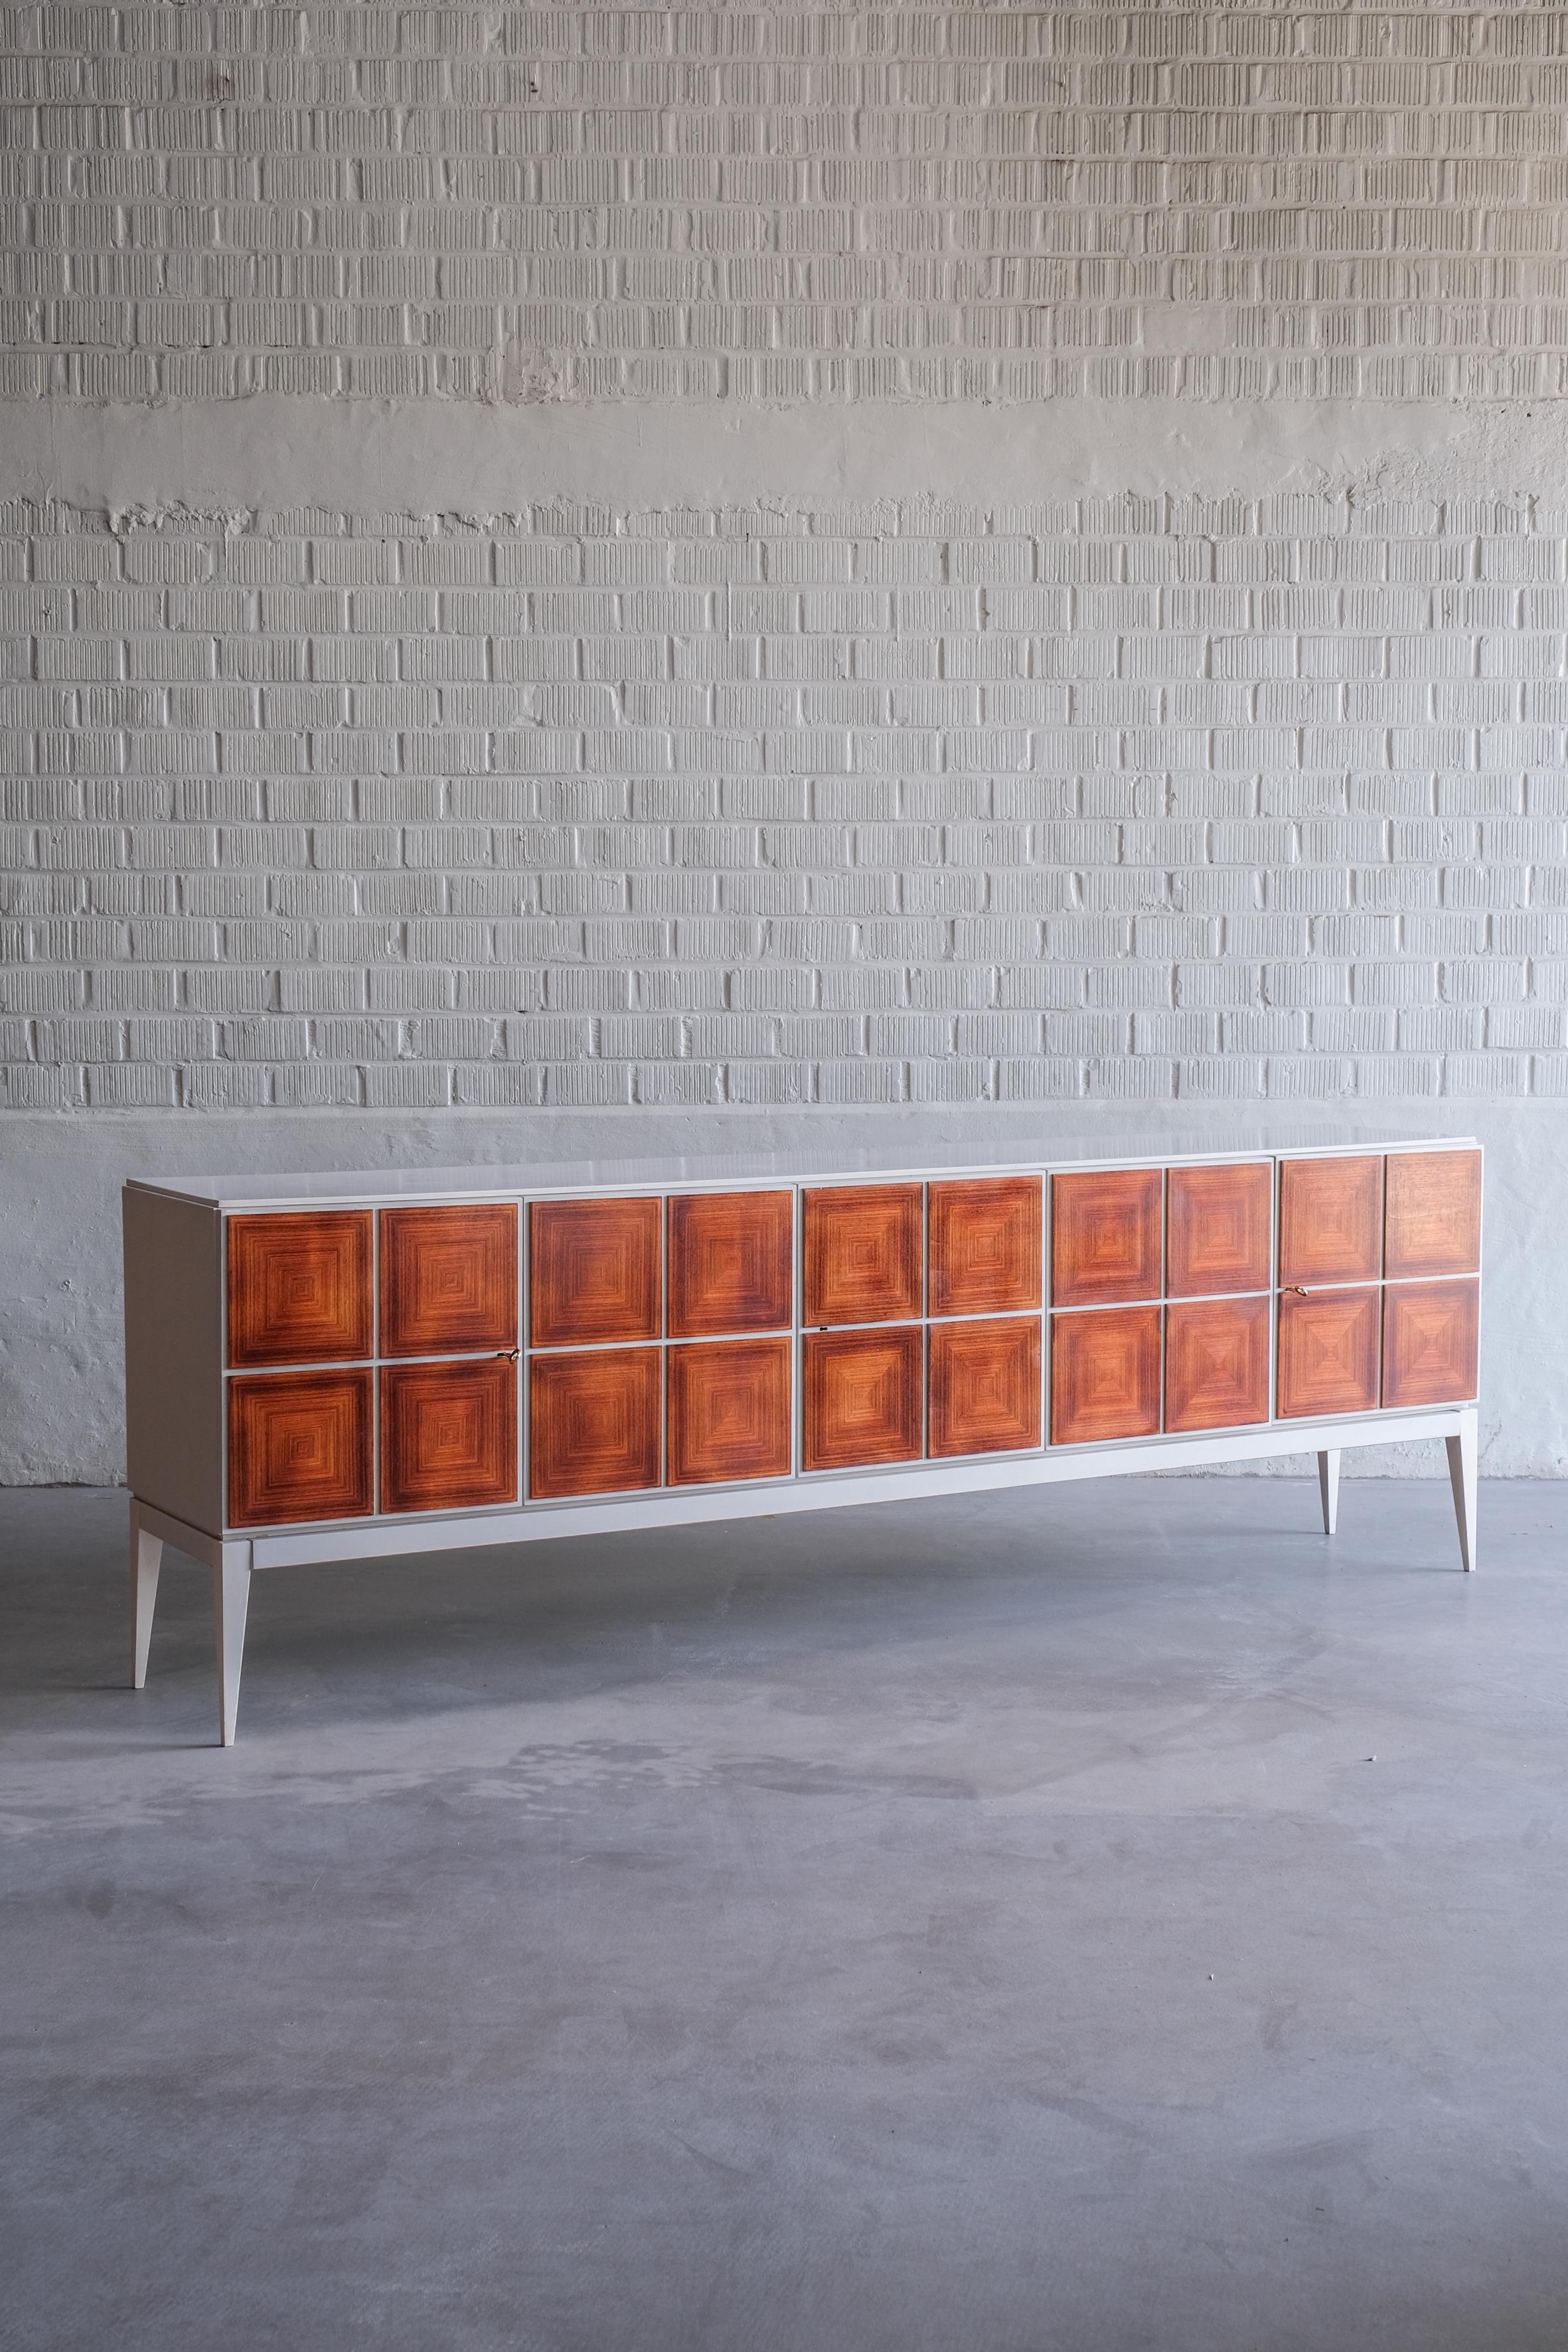 This XL sideboard is one of a kind due to his length.
The fine base and beautiful finished sideboard doors makes this a unique find. 